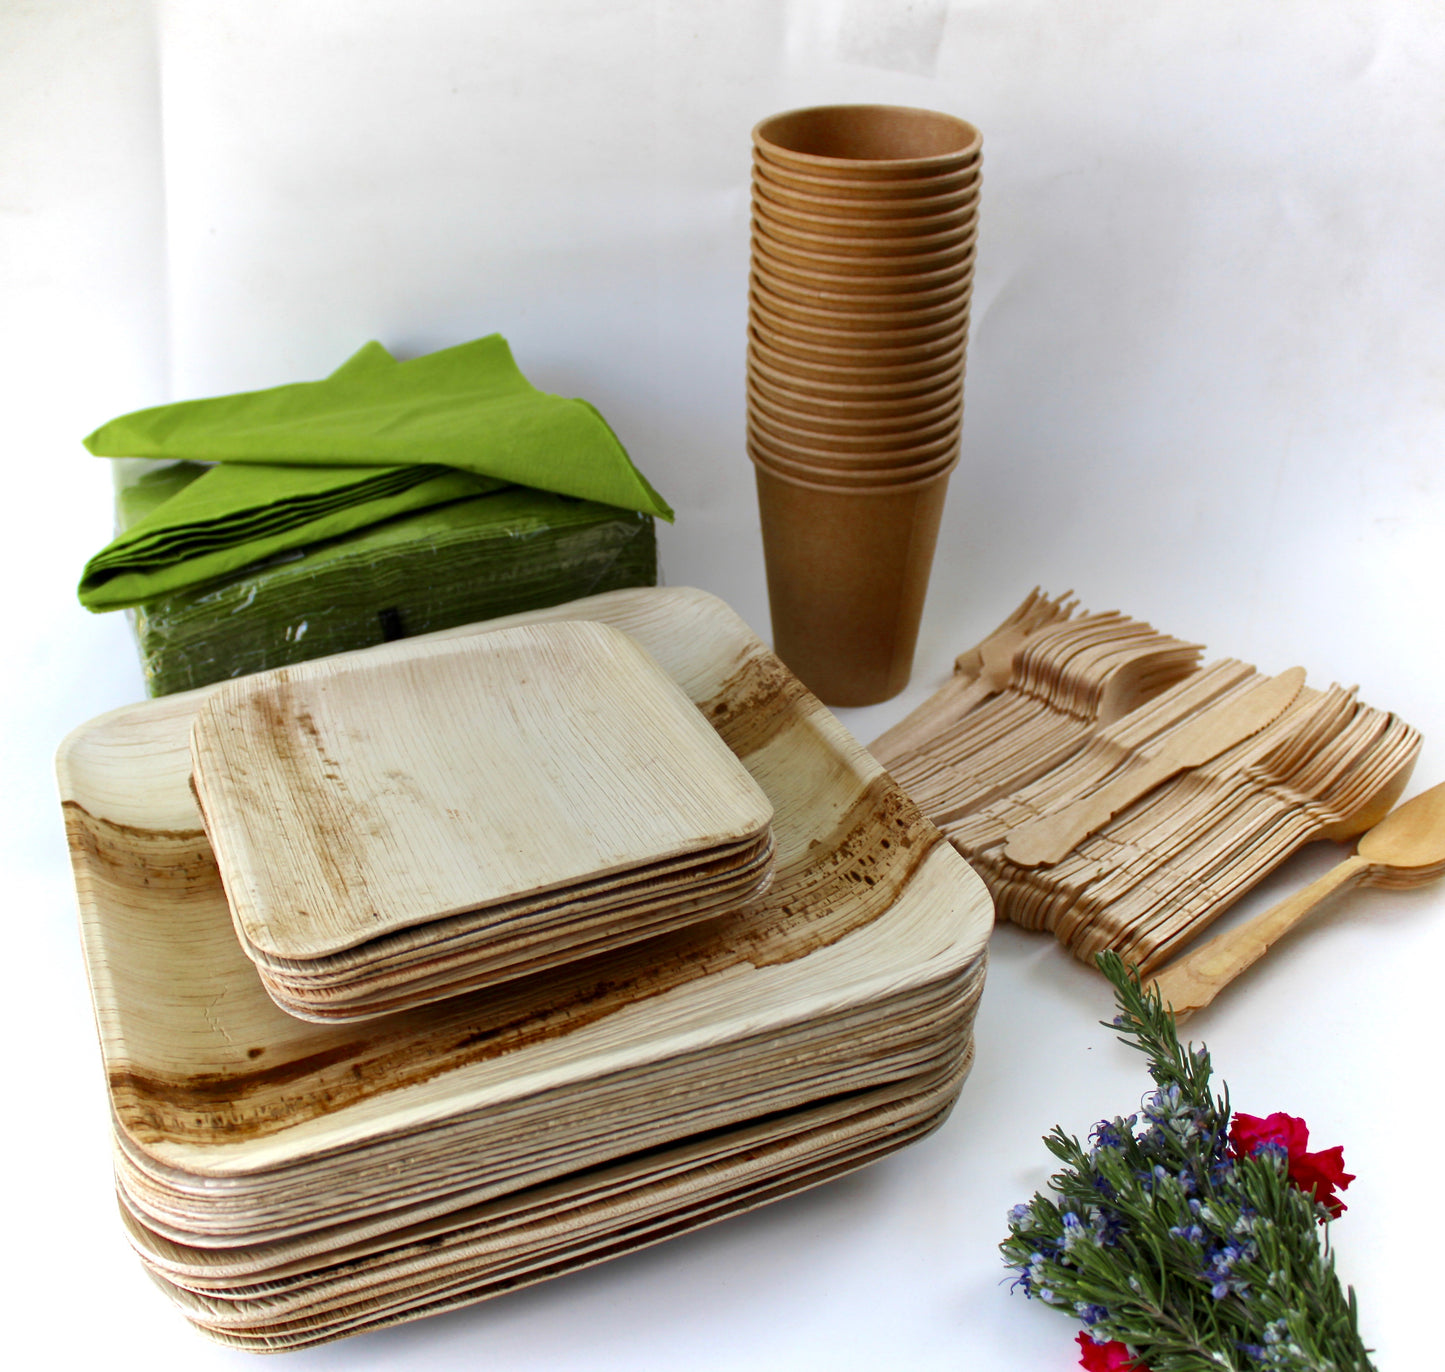 Bamboo Type Palm Leaf 25 Pic 10"Square  - 25 pice  7" Square - 25 Pic 6" Square  - 25  pic  cup  - 75 pic Cutlery - 50 Pic Napkin